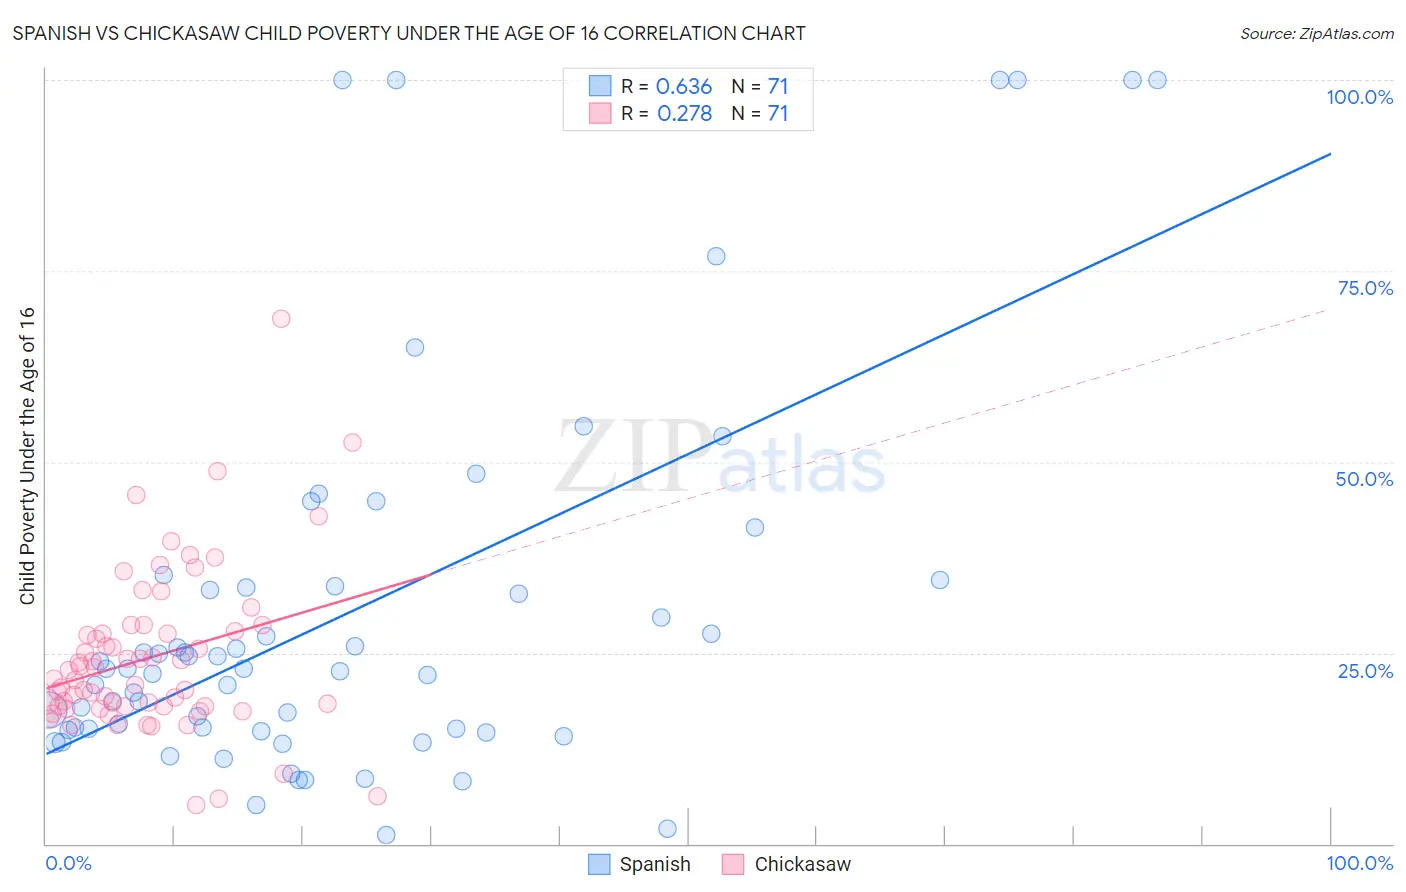 Spanish vs Chickasaw Child Poverty Under the Age of 16